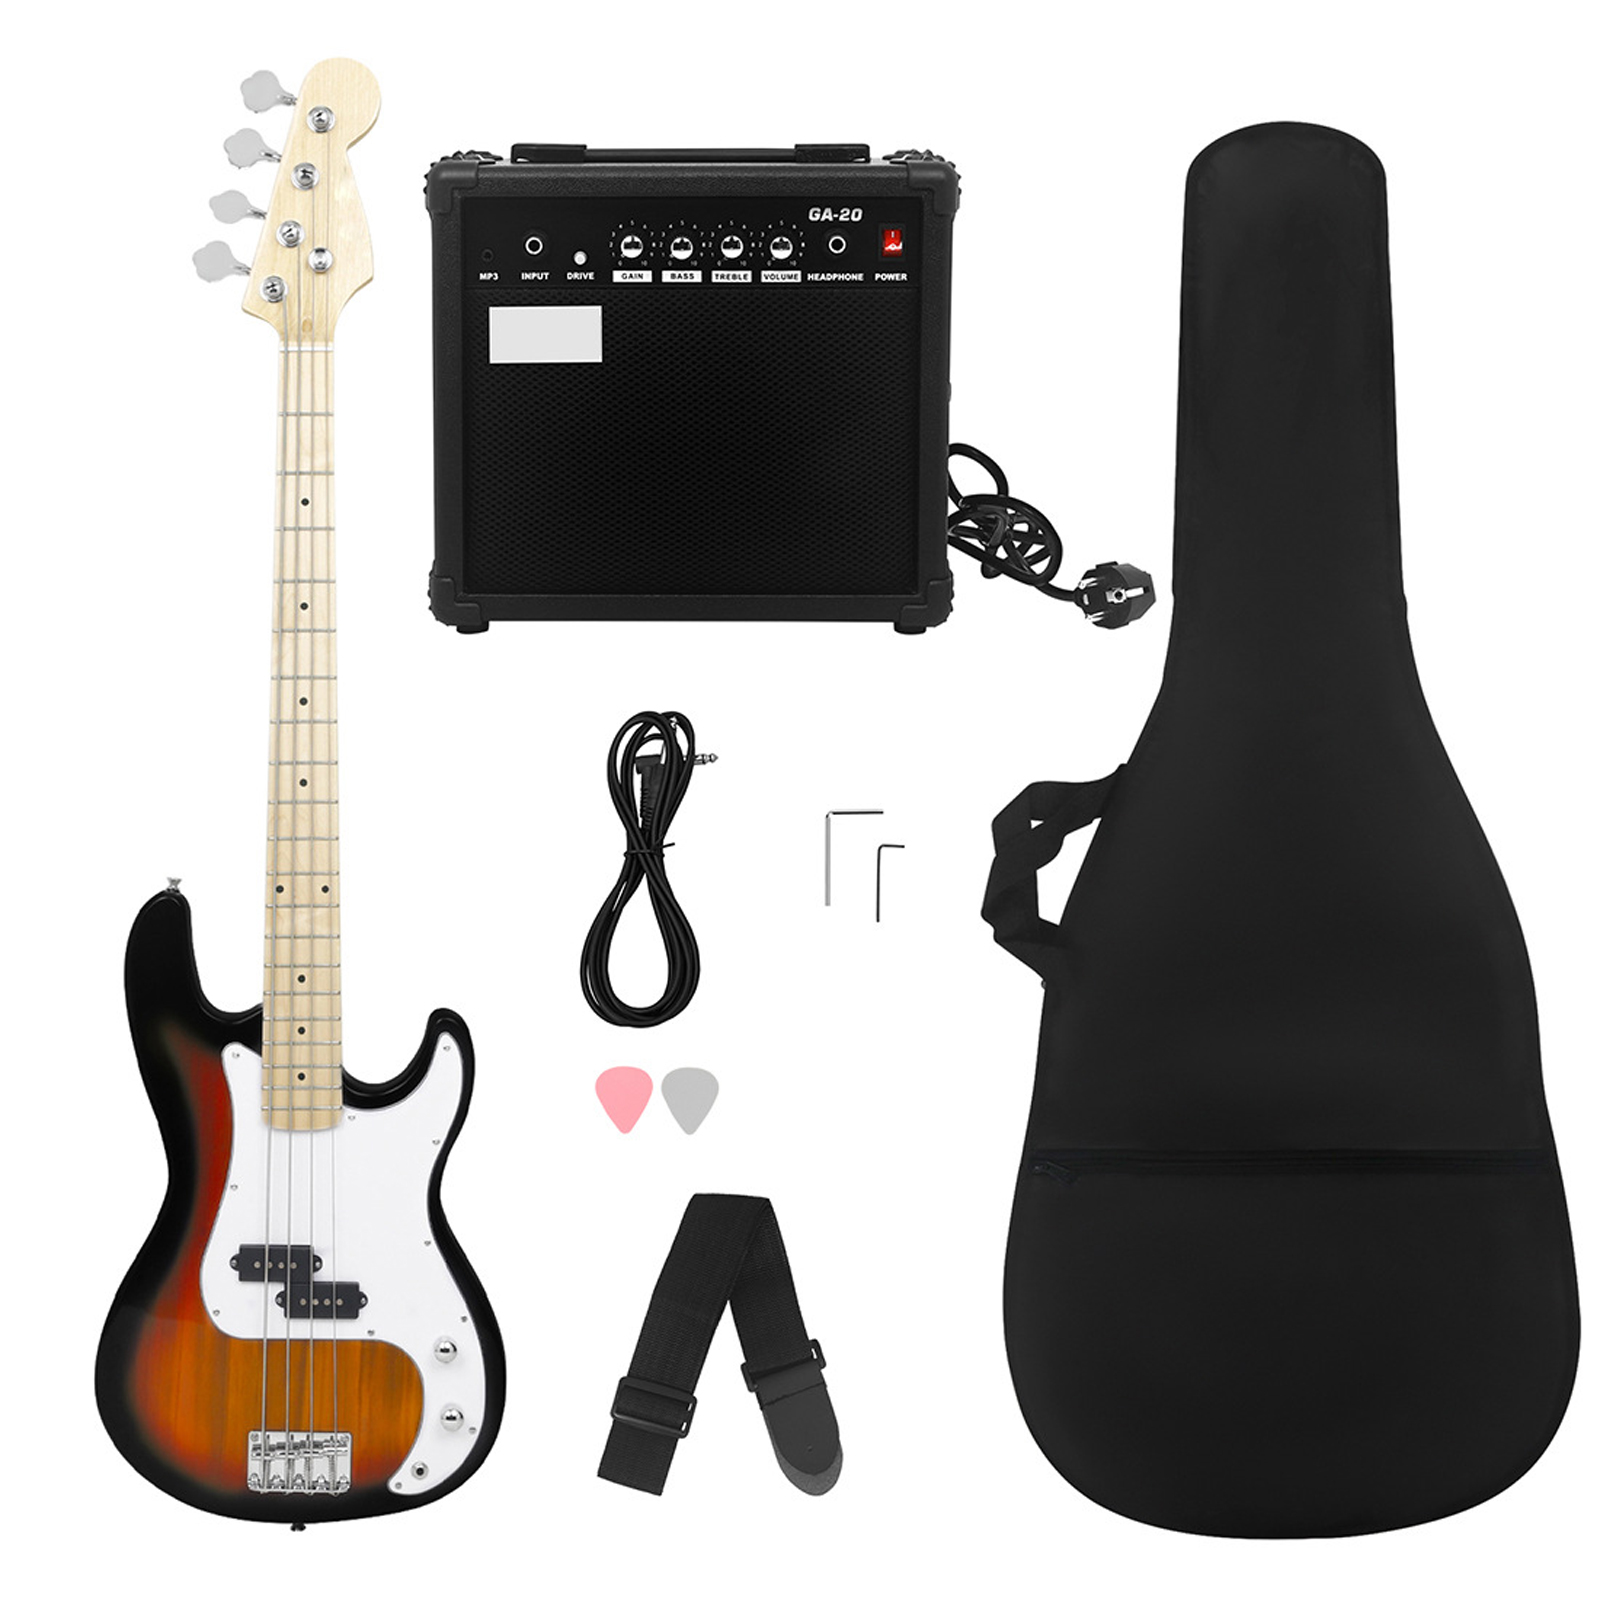 Electric Guitar Professional 4 String Exquisite Stylish Bass Guitar Music Equipment With Power Line Bag Wrench Tool Wood grain